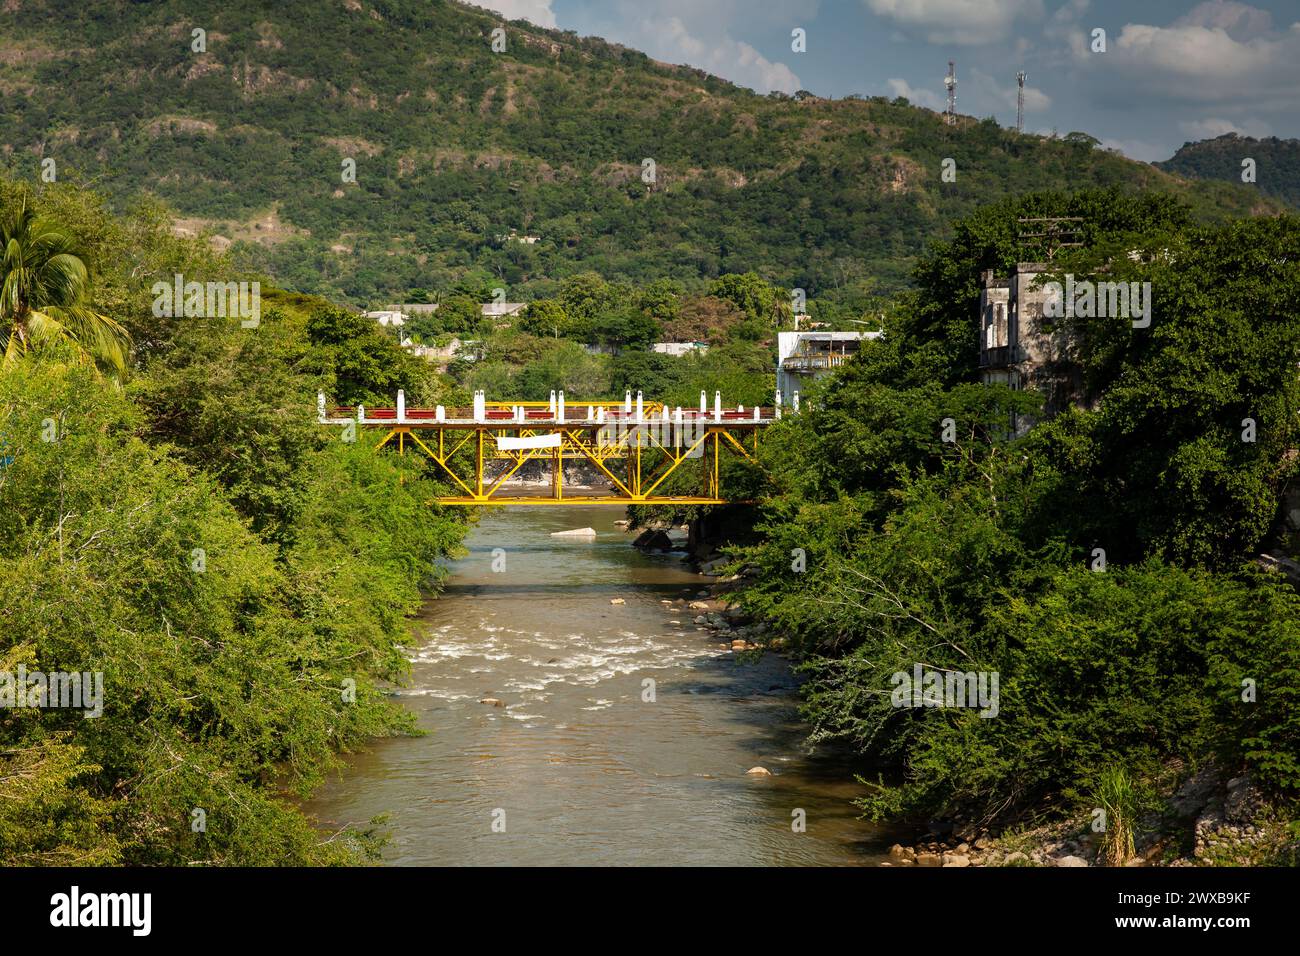 View of the Agudelo River over the Guali River in the Heritage Town of Honda in the Department of Tolima in Colombia Stock Photo